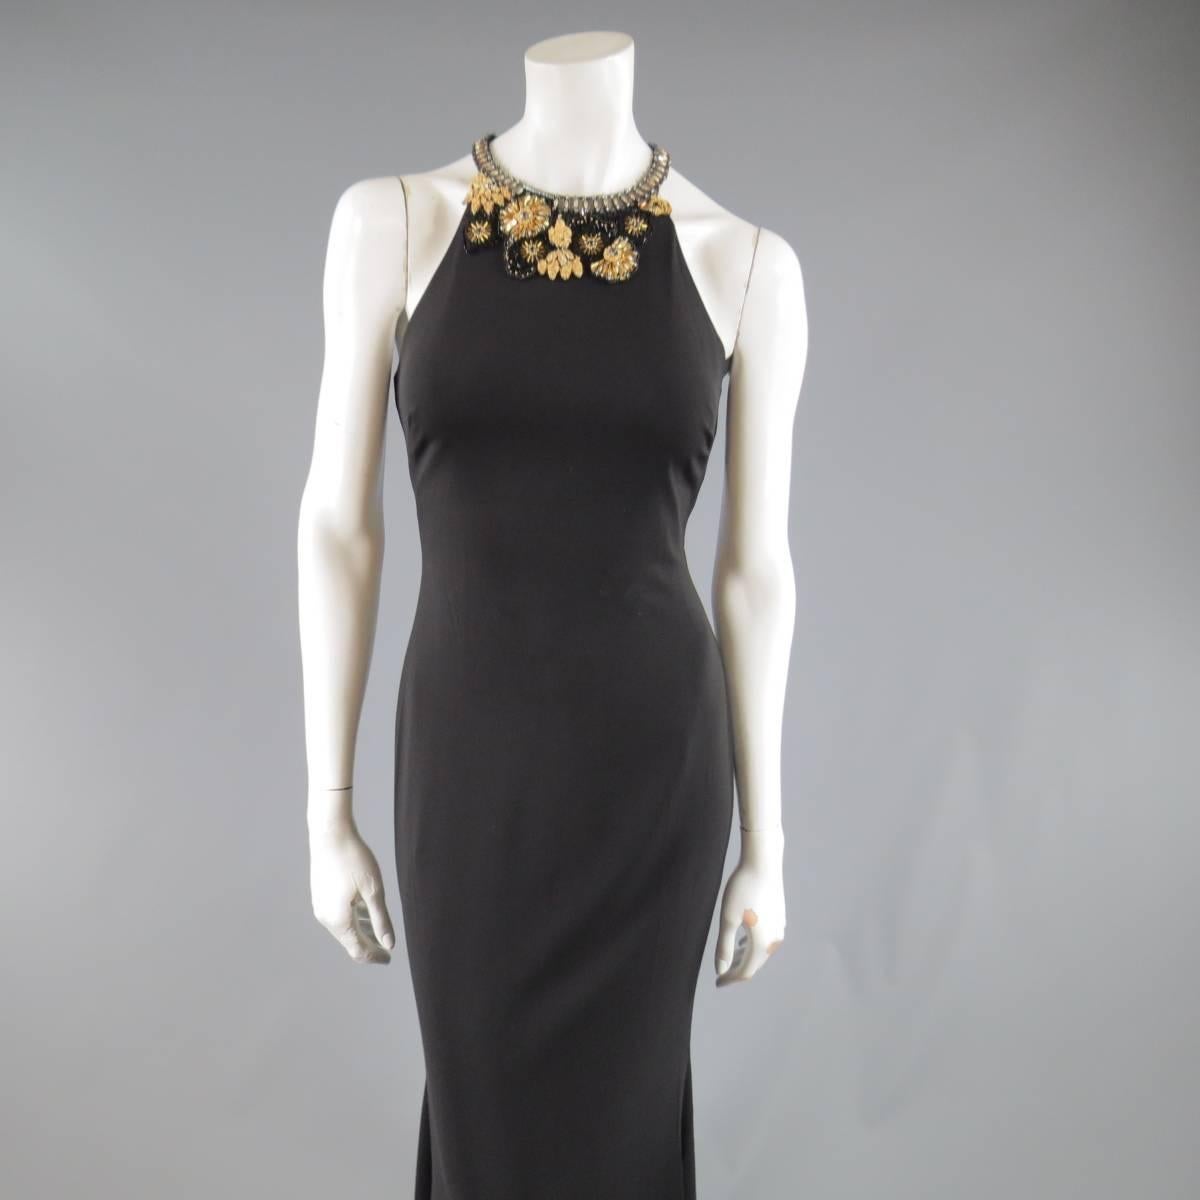 BADGLEY MISCHKA Size 2 Black & Gold Floral Beaded Sleeveless Gown 1